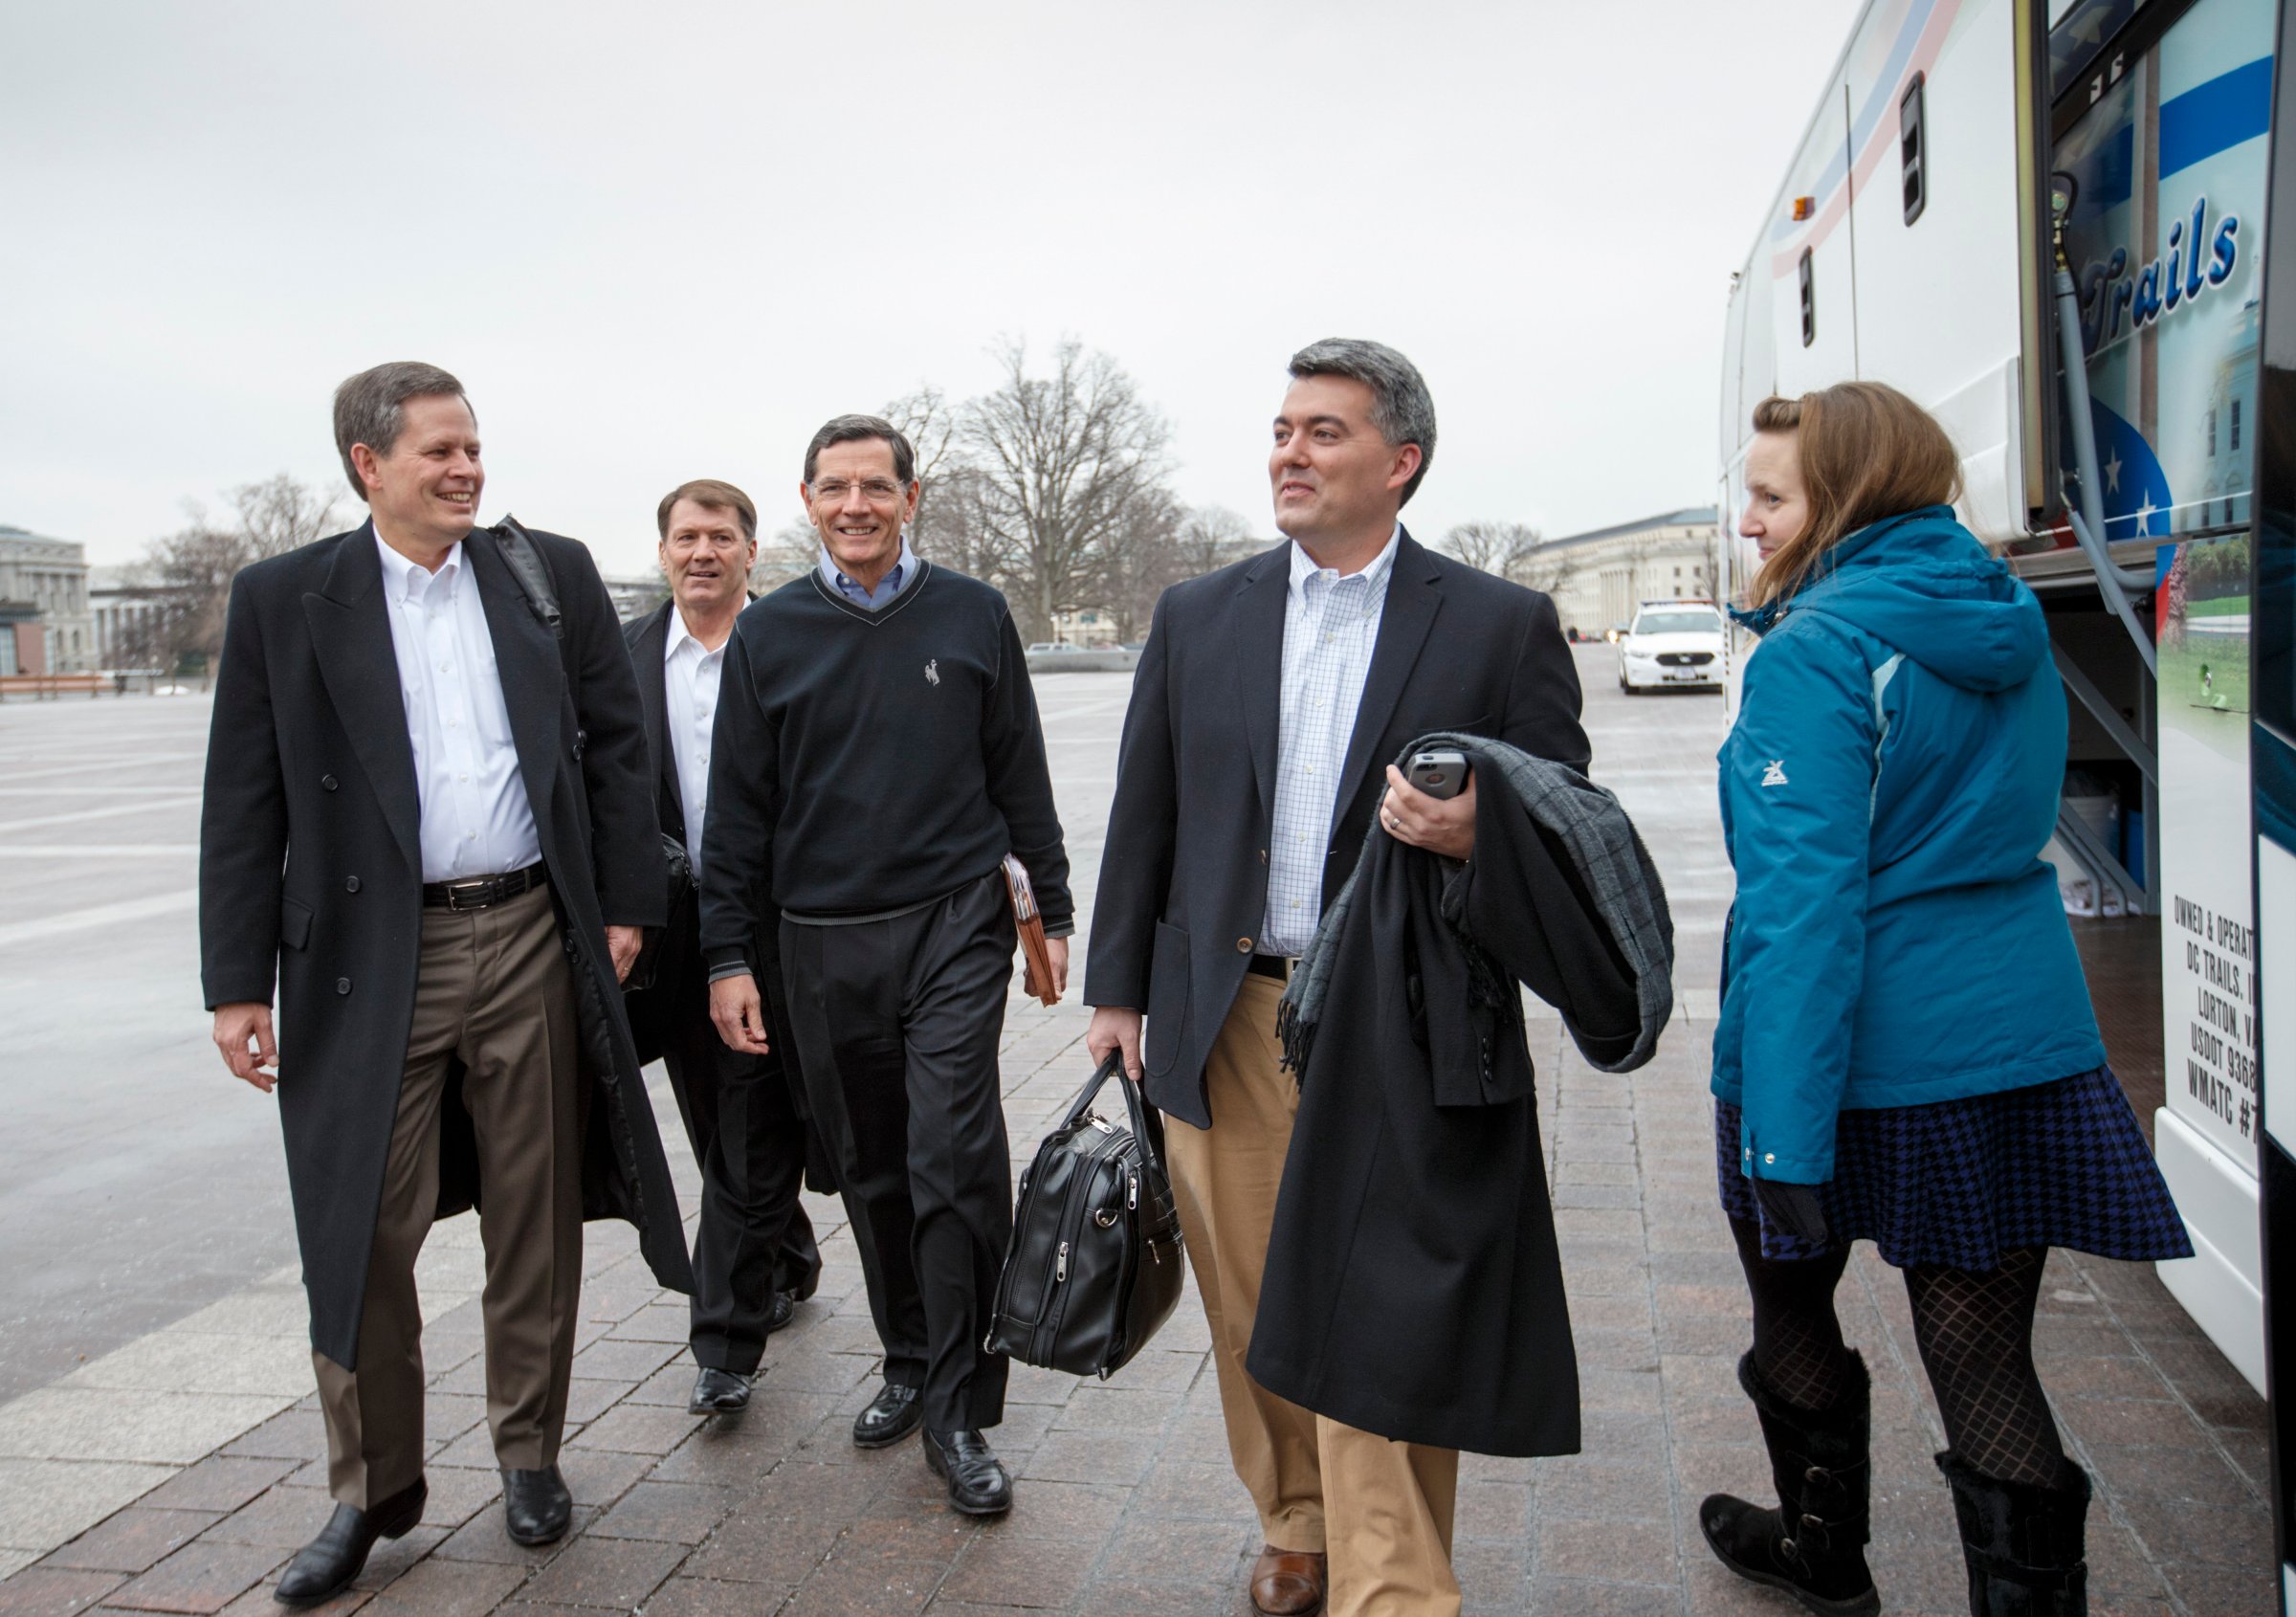 From left, Sen. Steve Daines, R-Mont., Sen. Mike Rounds, R-S.D., Sen. John Barrasso, R-Wyo., and Sen. Cory Gardner, R-Colo., prepare to board a tour bus to join Senate and House Republicans at a two-day policy retreat in Hershey, Pa. on Jan. 14, 2015, in Washington.